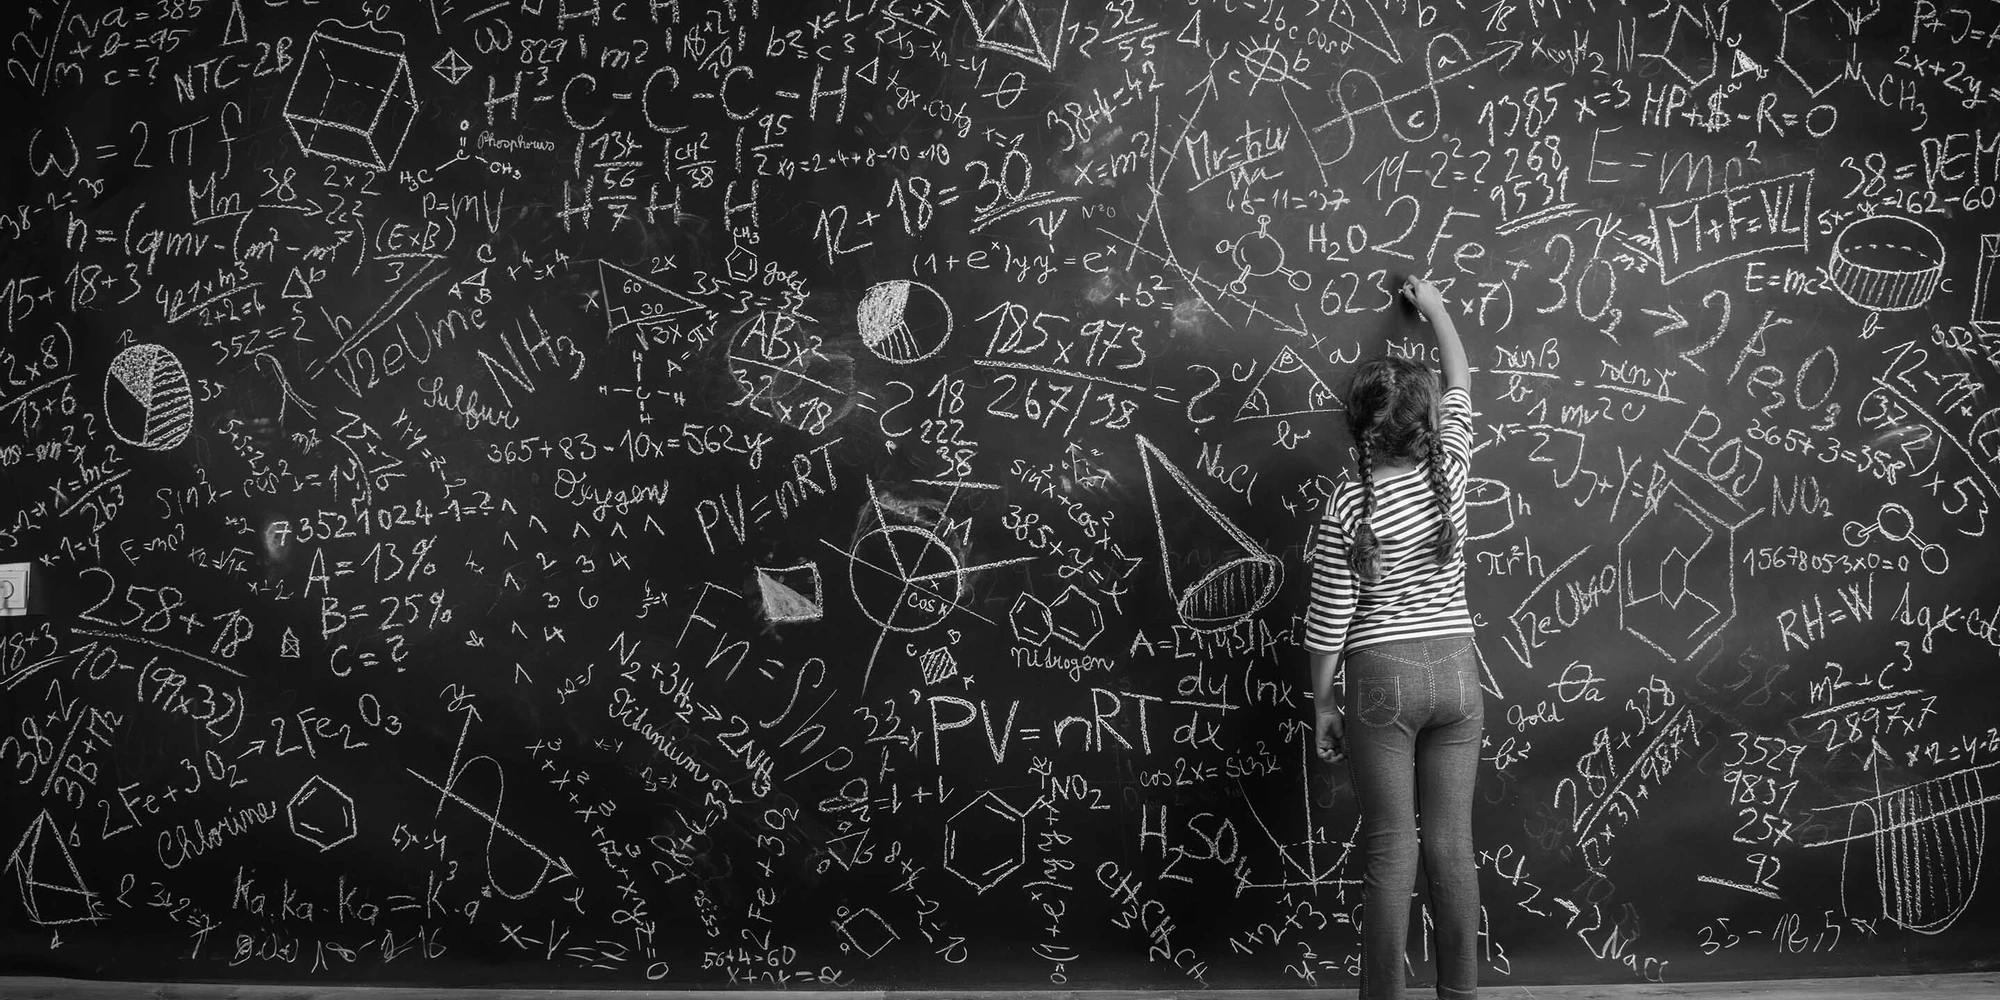 A girl is writing on a chalkboard full of math equations.